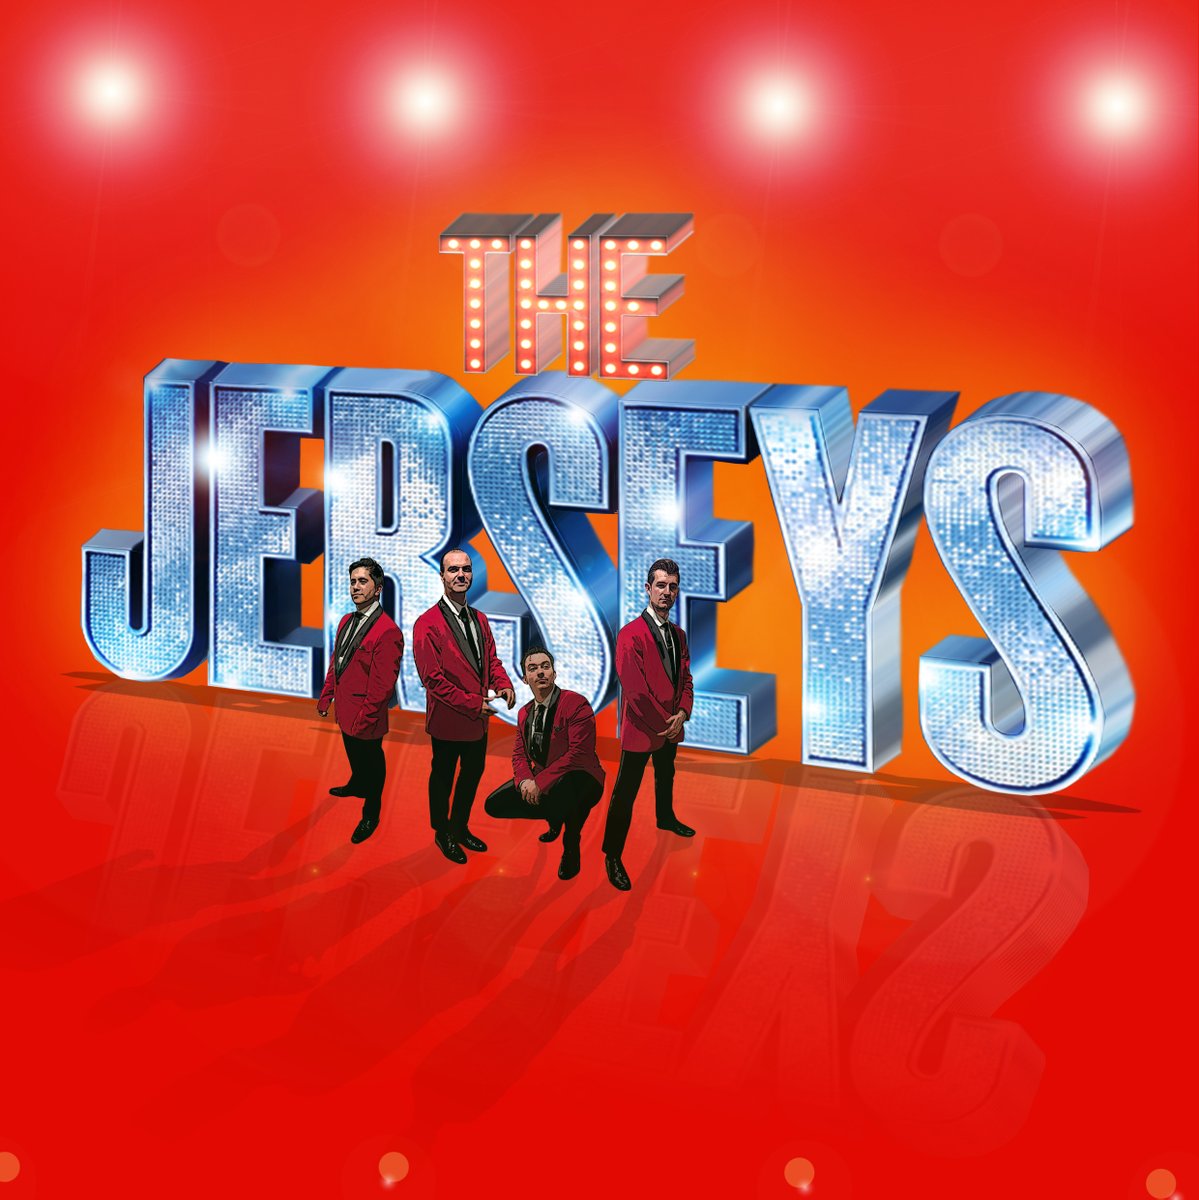 Join The Jerseys at The Met in May as they celebrate the timeless music of Frankie Valli and The Four Seasons! 🎙️ Along with their live four piece band, this all-singing all-dancing show features hit after hit, comedy and more 🙌 Tickets here 👉ow.ly/RECE50Ql0TG